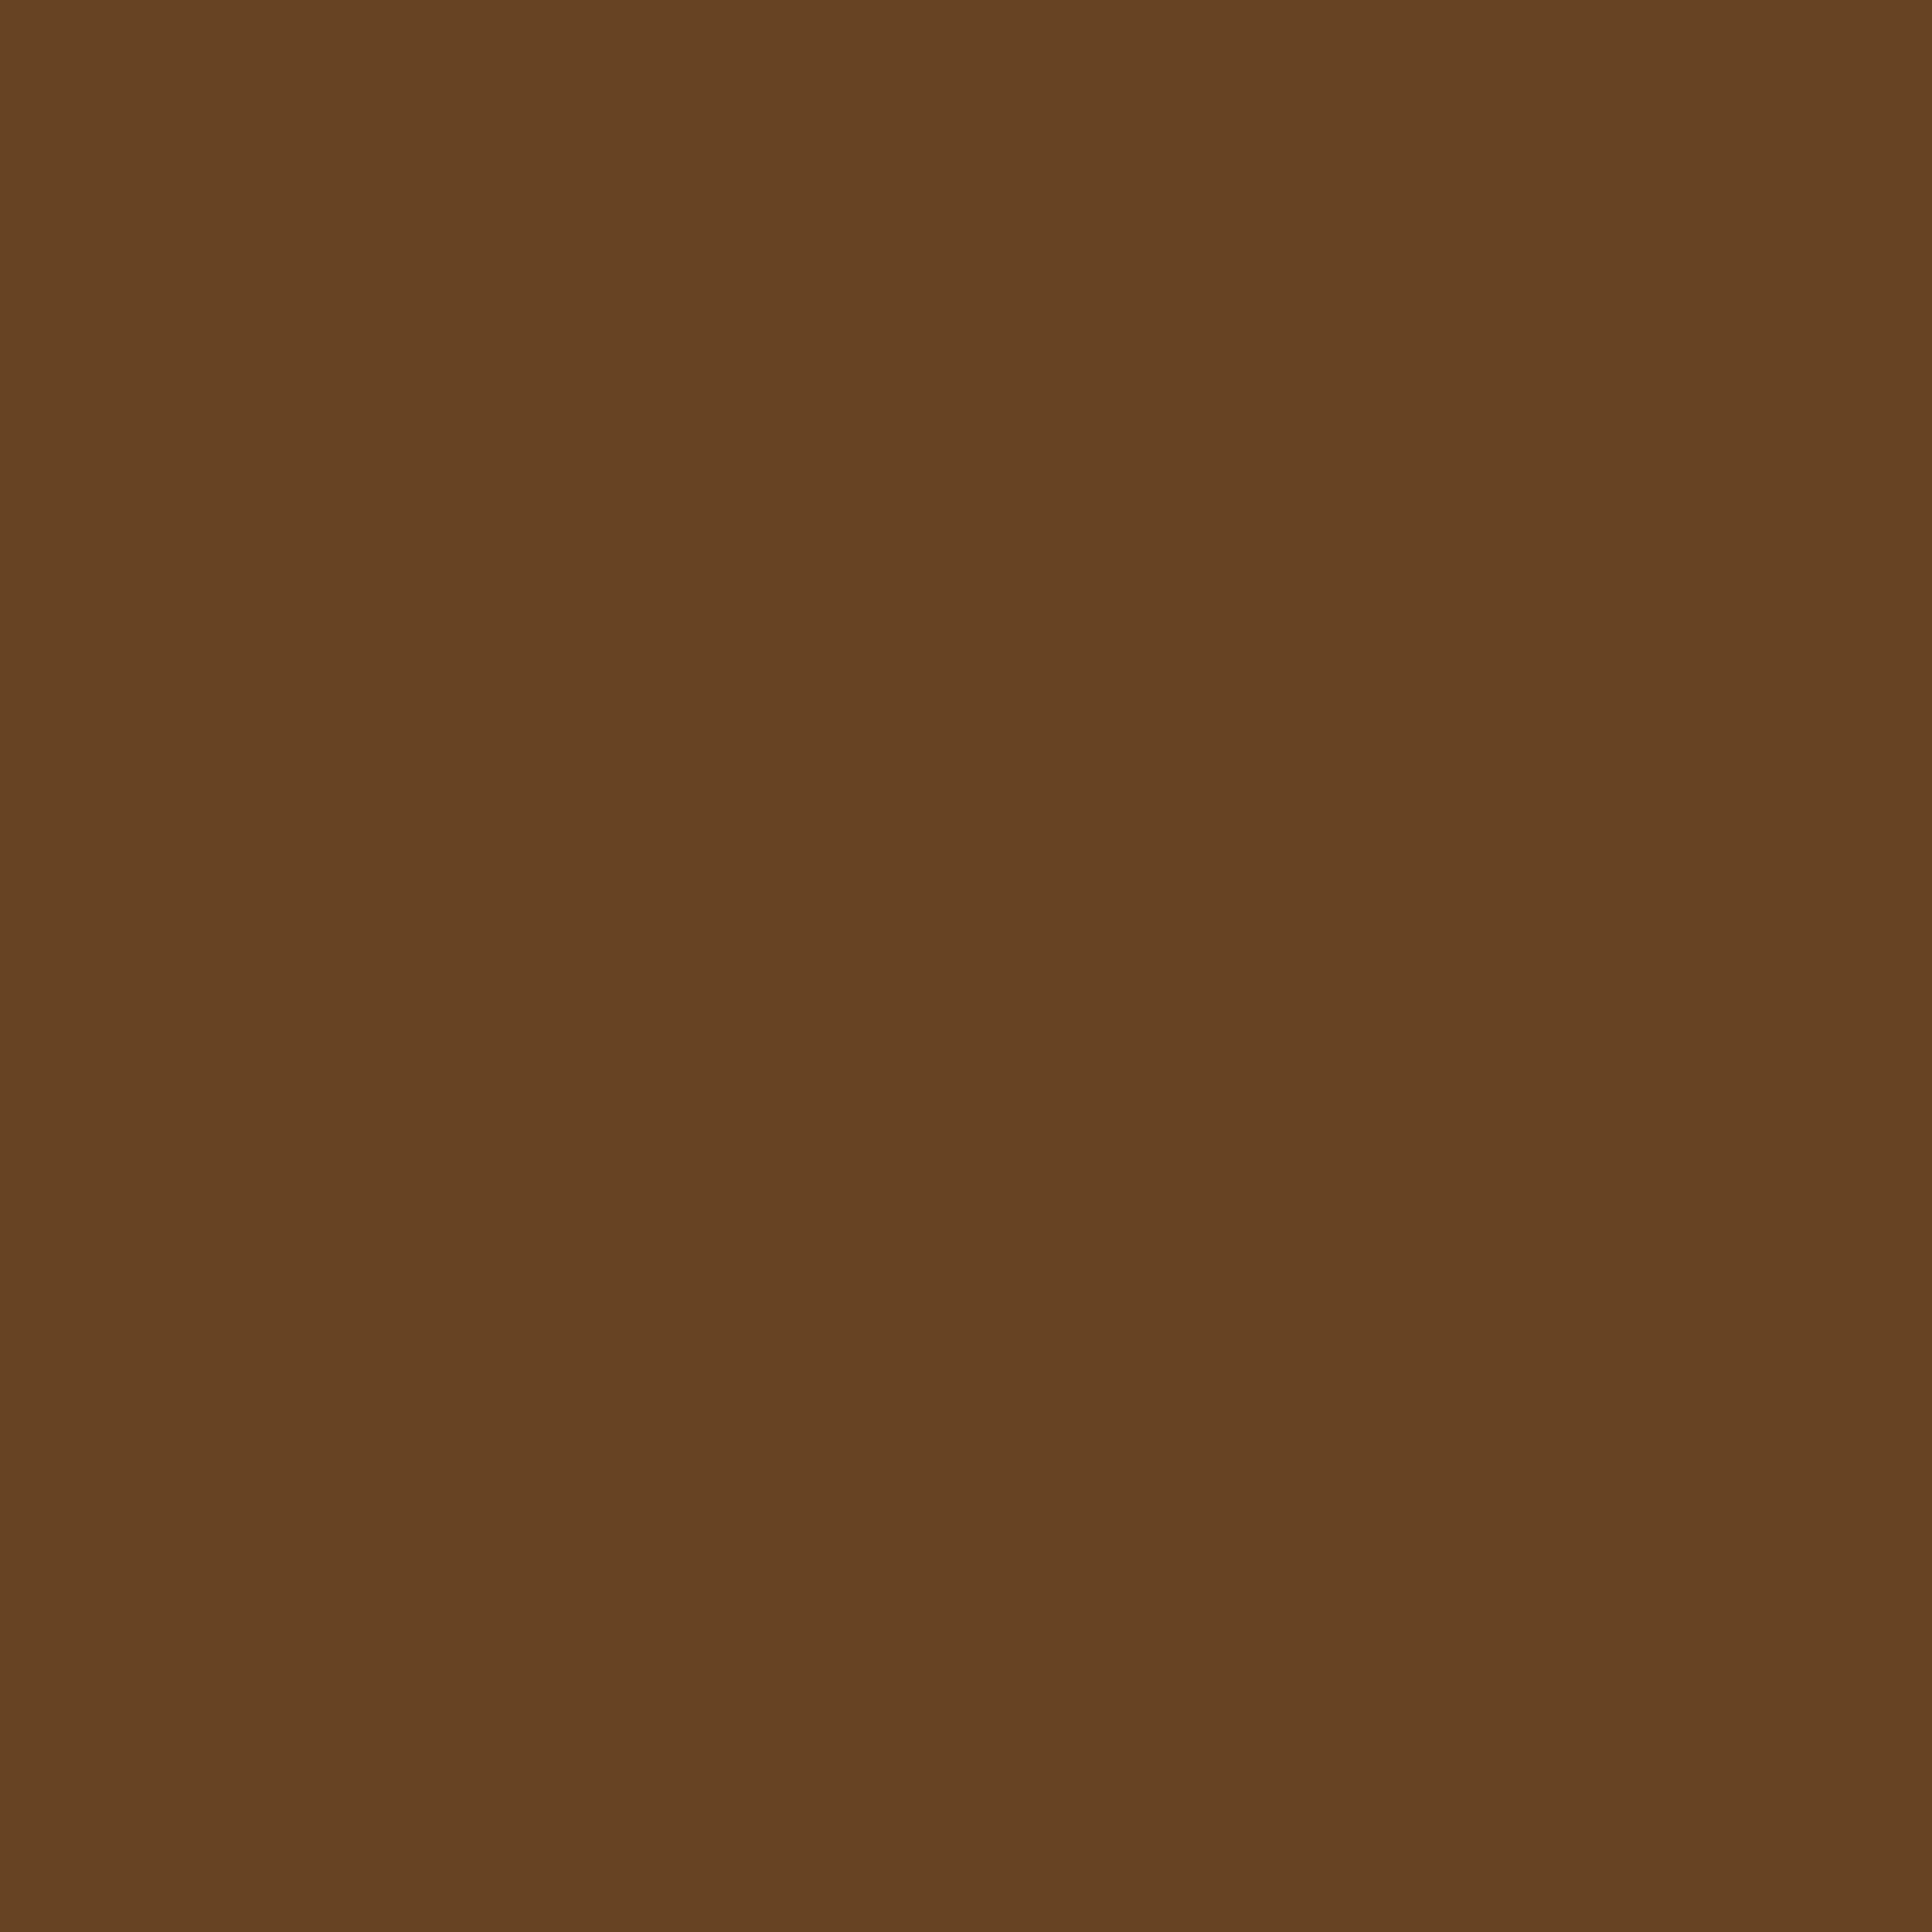 2048x2048 Otter Brown Solid Color Background